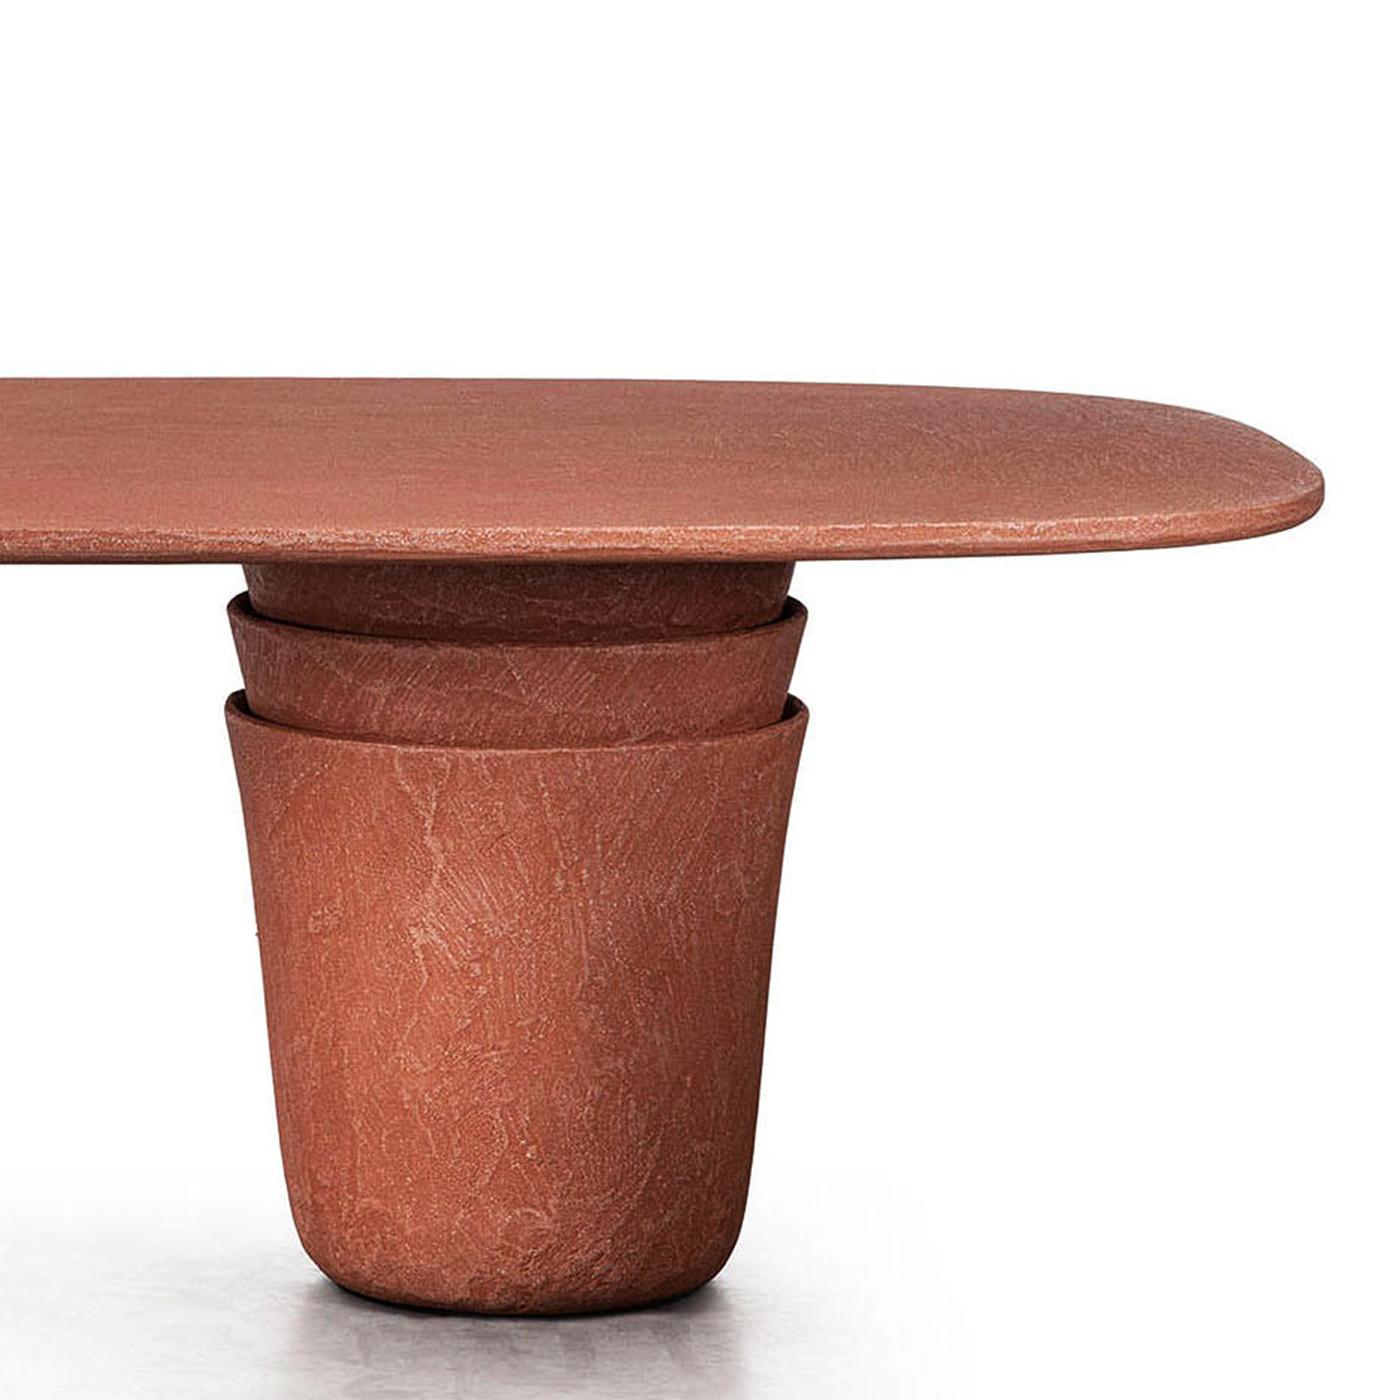 Table vick coral large outdoor with wooden top in 
coral finish and with 2 bases in resin polymer in coral finish.
Also available in cement finish, on request.